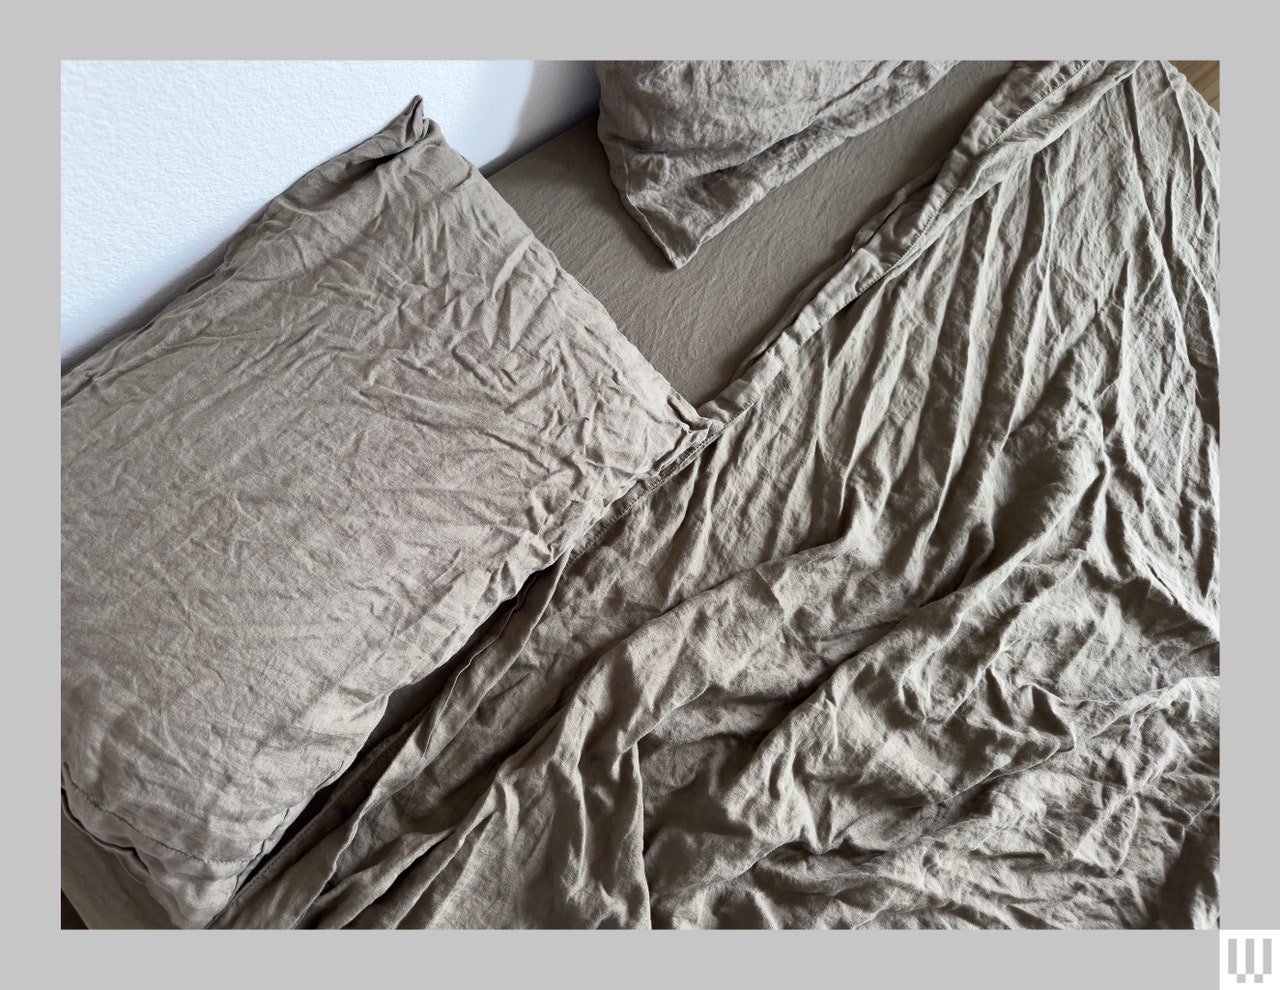 Overhead view of wrinkled grey linen sheets and pillows